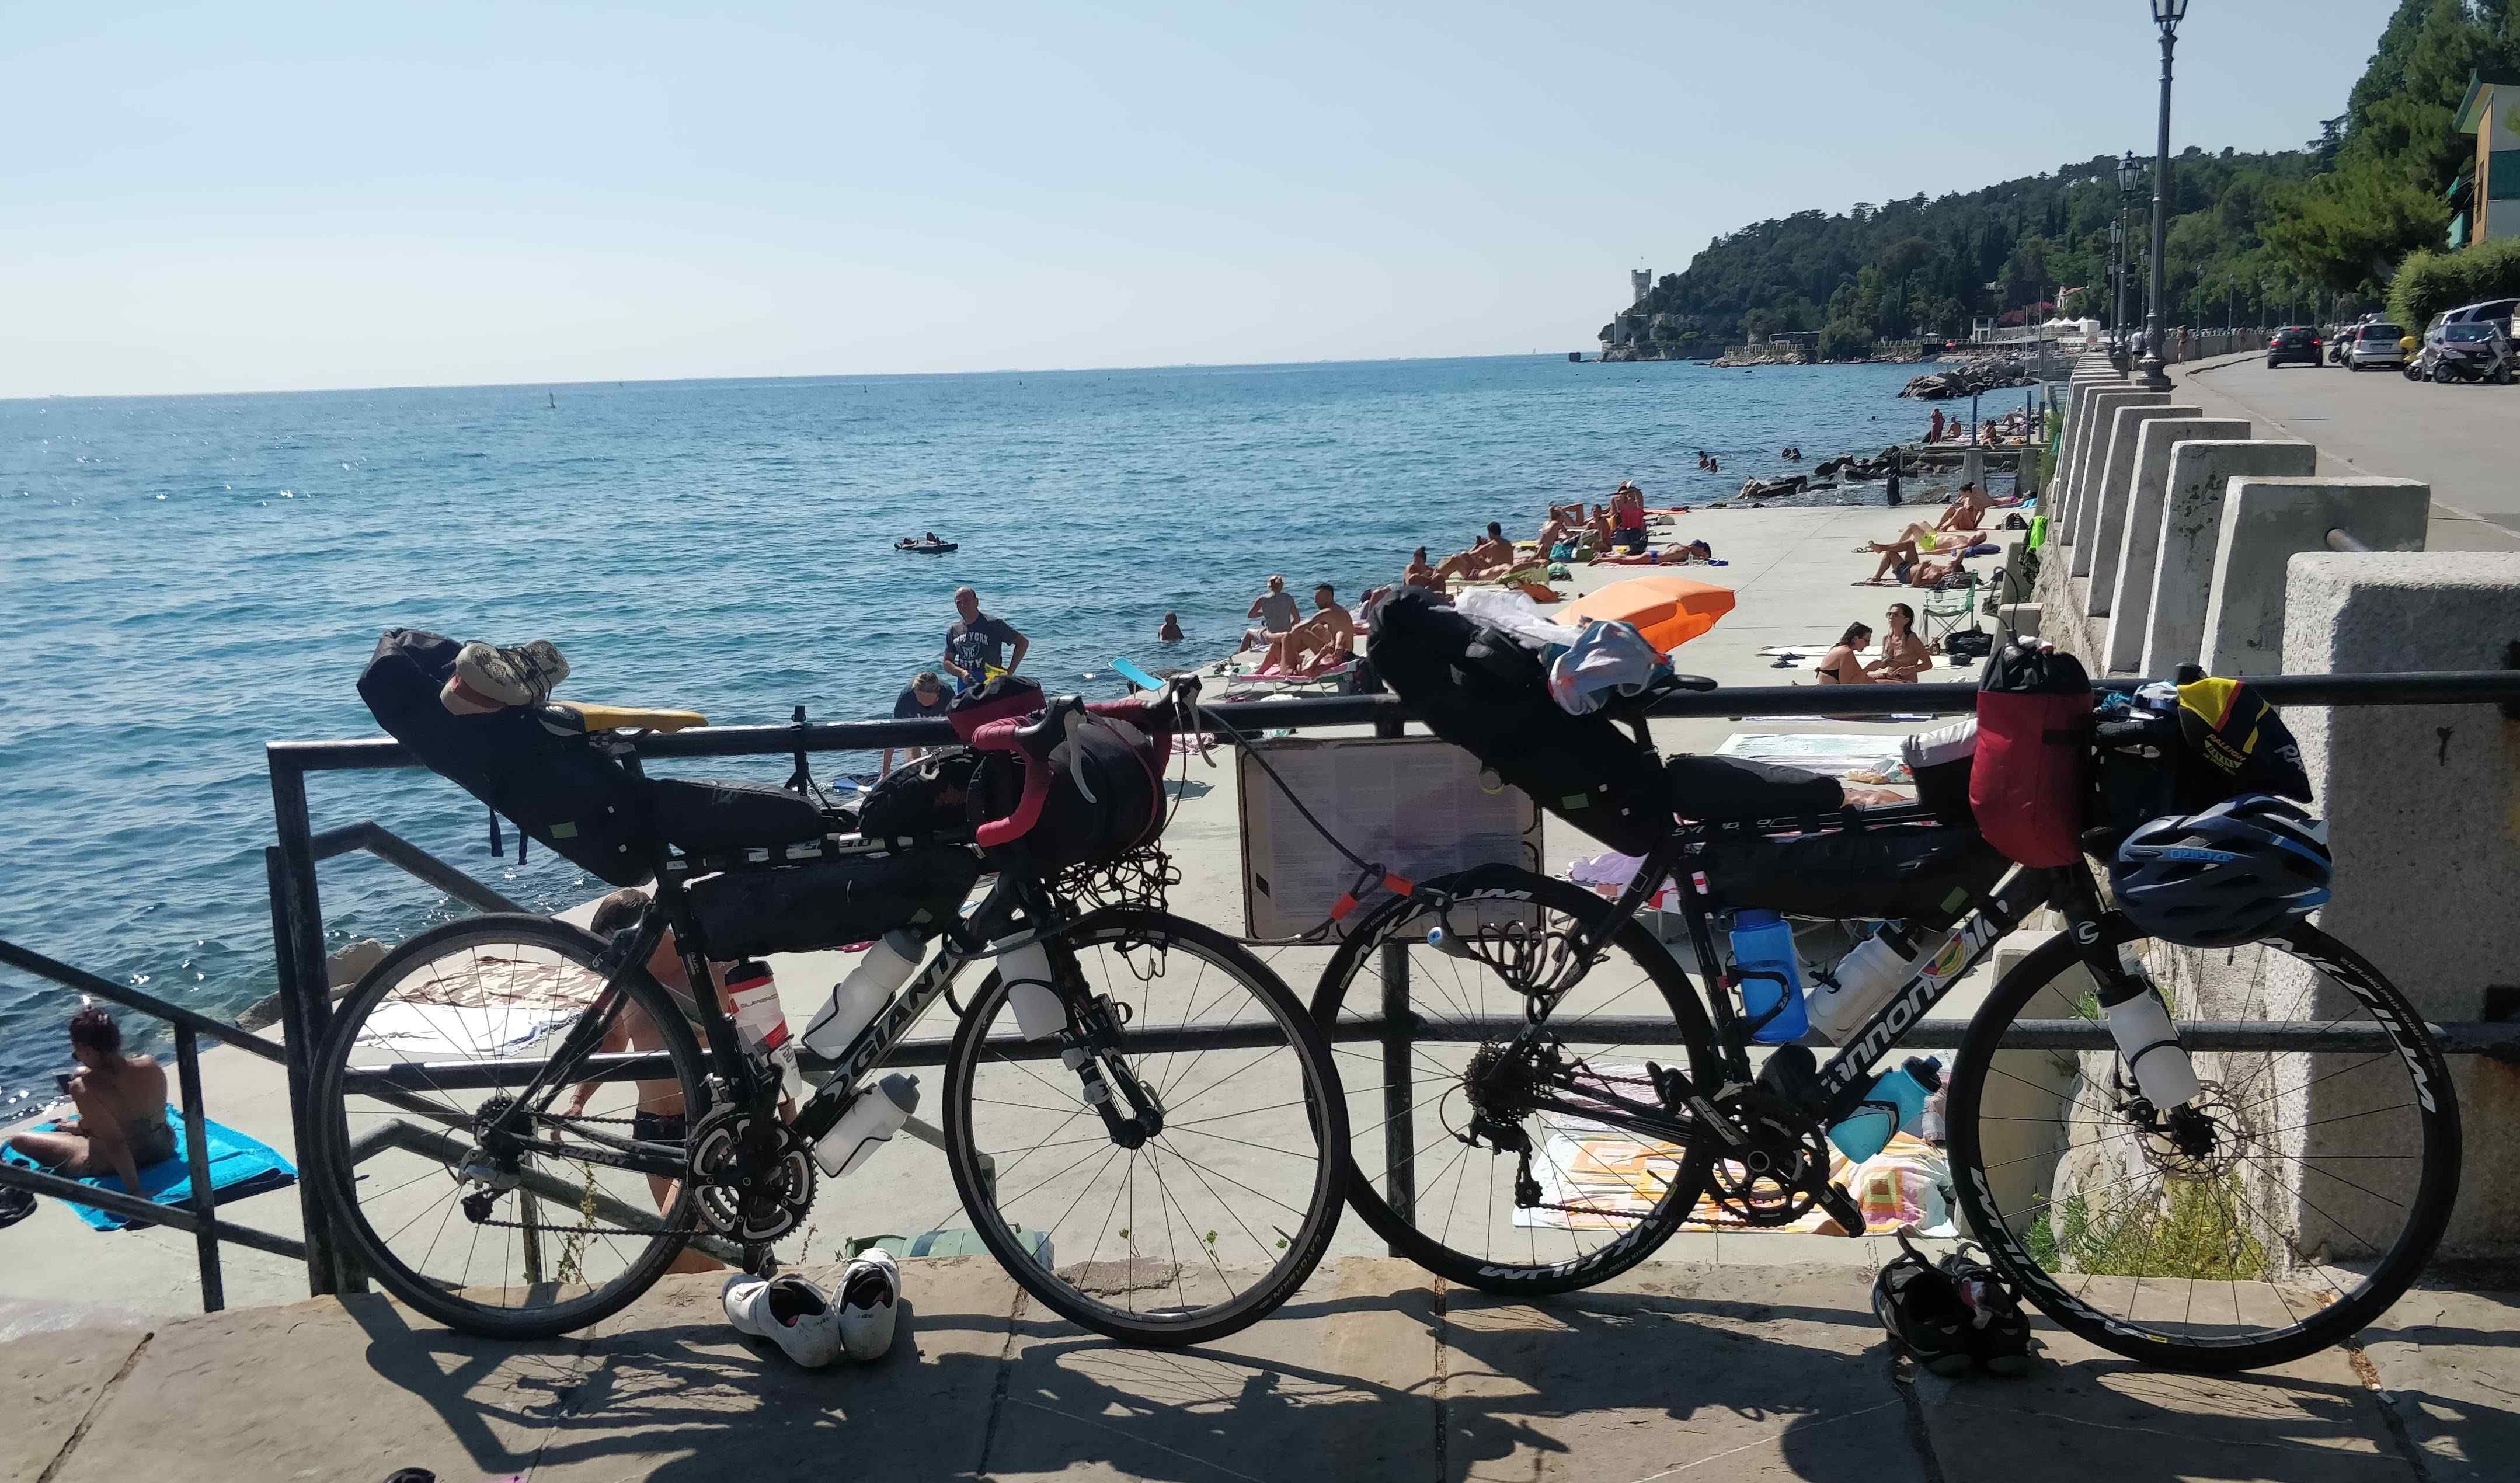 2019 London to Athens Cycle Expedition